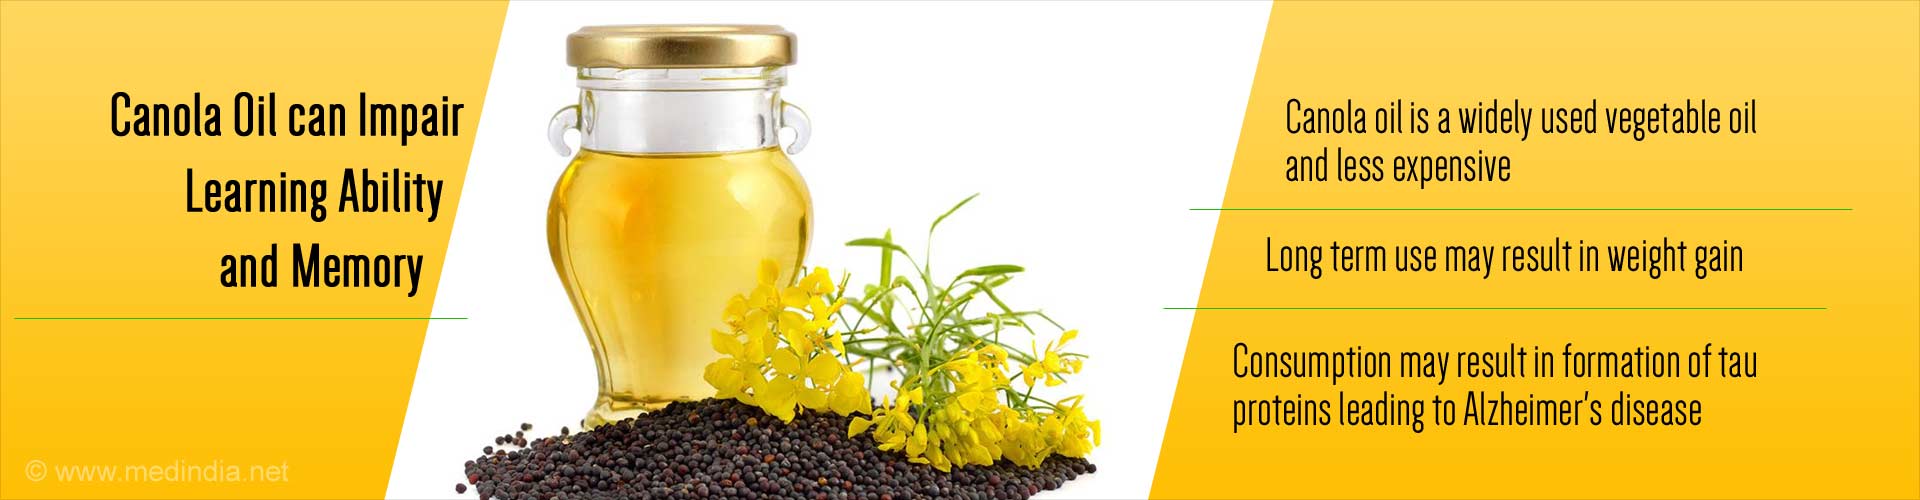 canola oil can impair learning ability and memory
- canola oil is a widely used vegetable oil and less expensive
- long term use may result in weight gain
- consumption may result in formation of tau proteins leading to Alzheimer's disease
